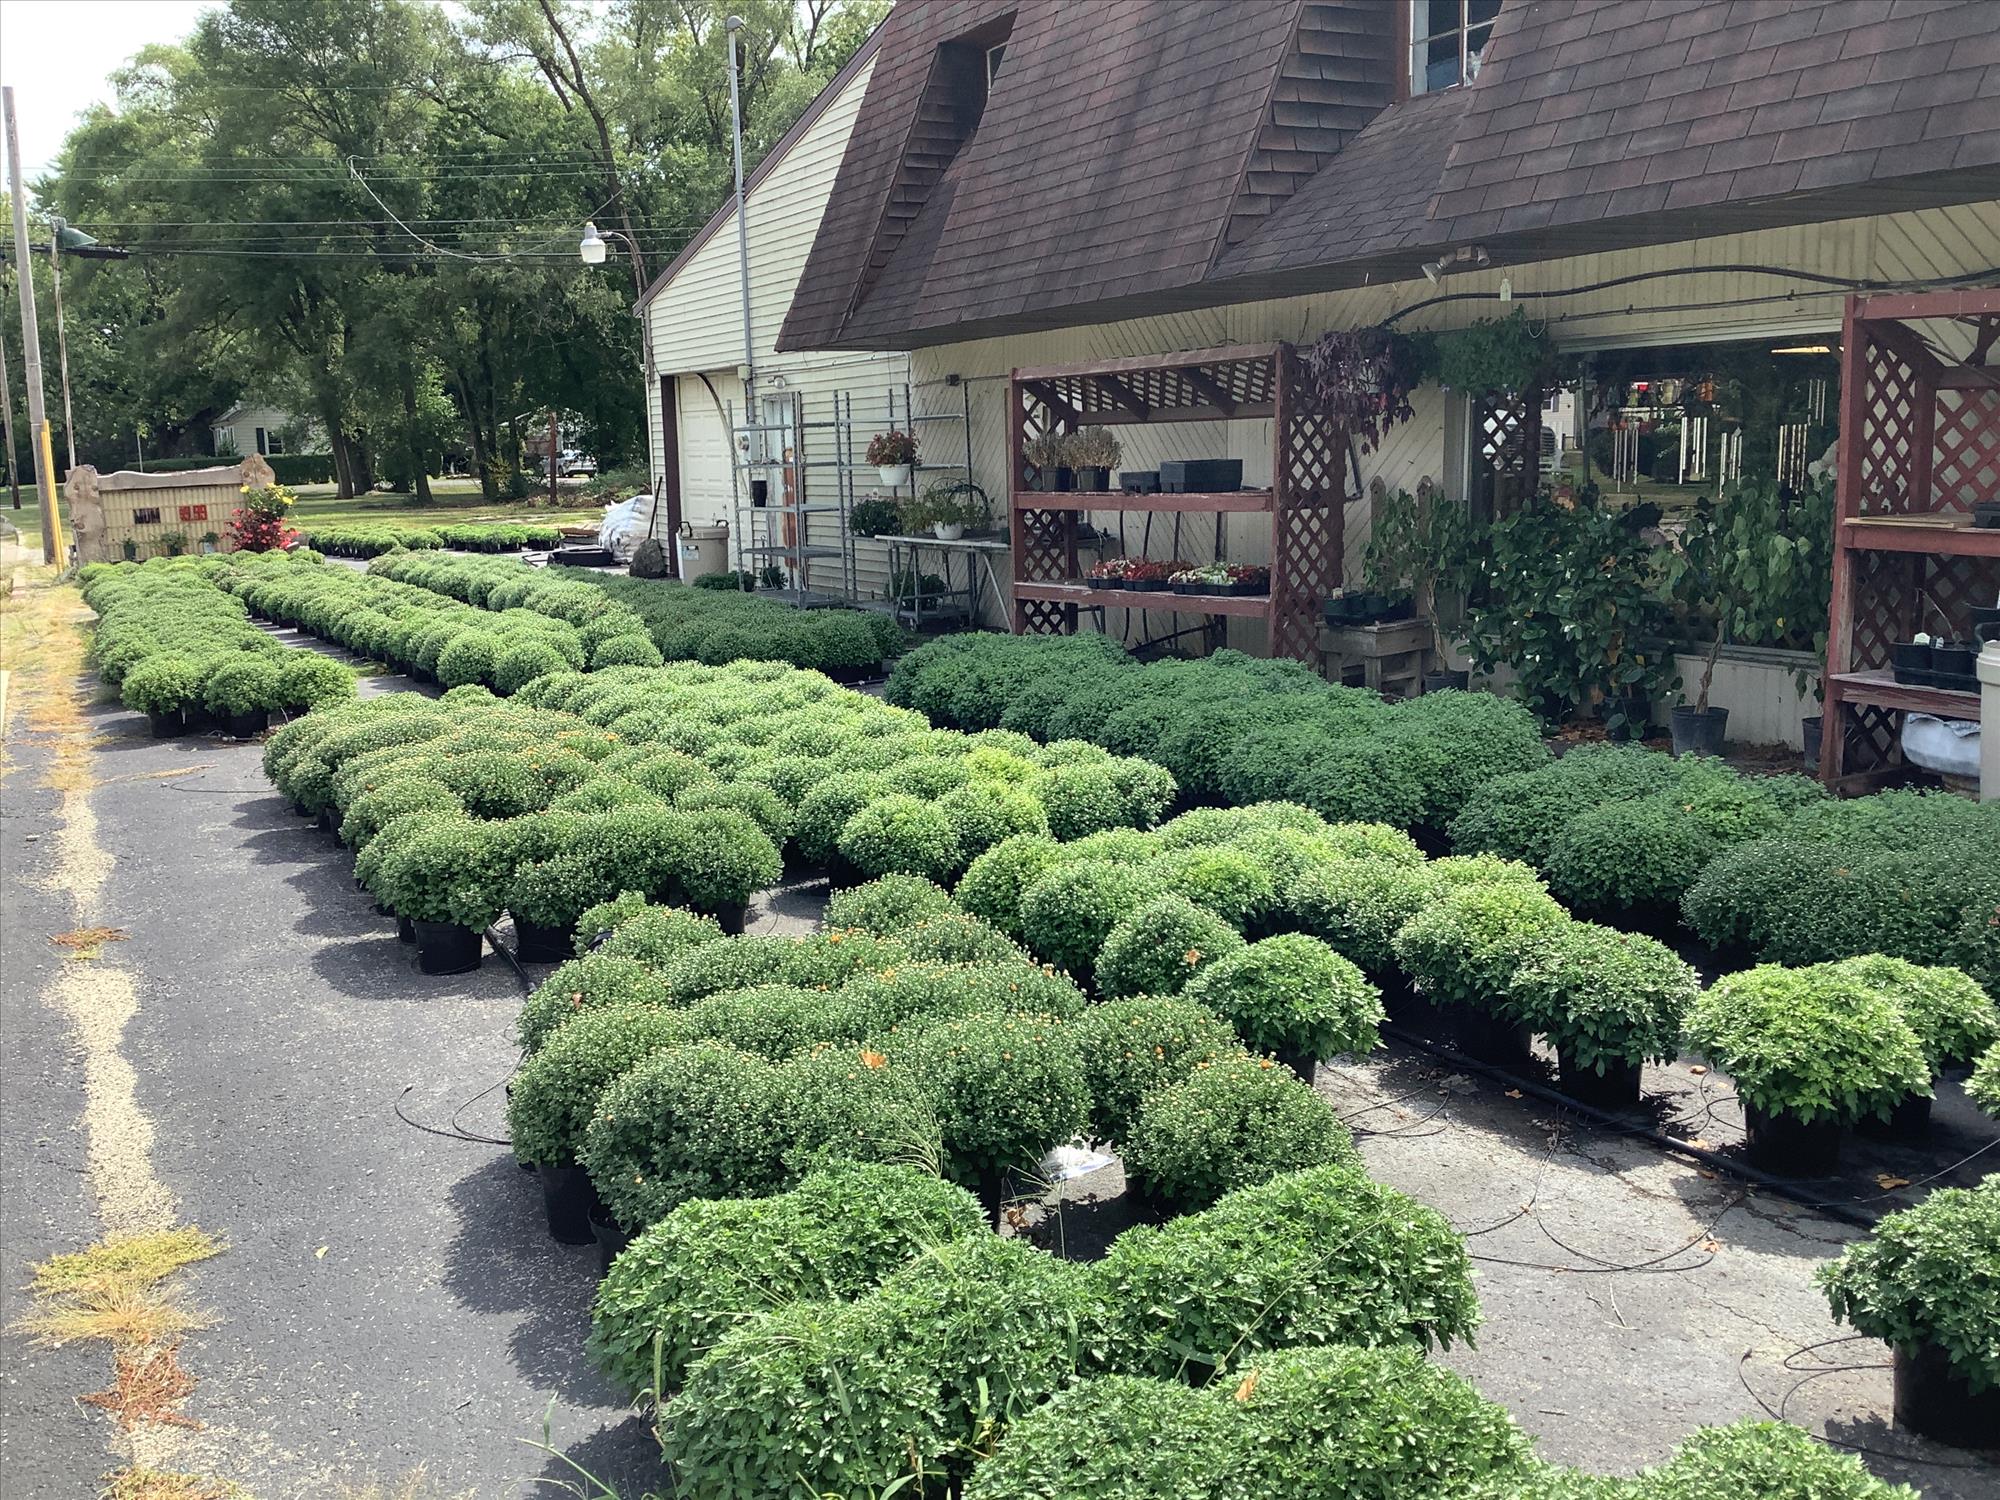 Liggett's Floral Shop & Greenhouse 537 N Main St, Albany Indiana 47320